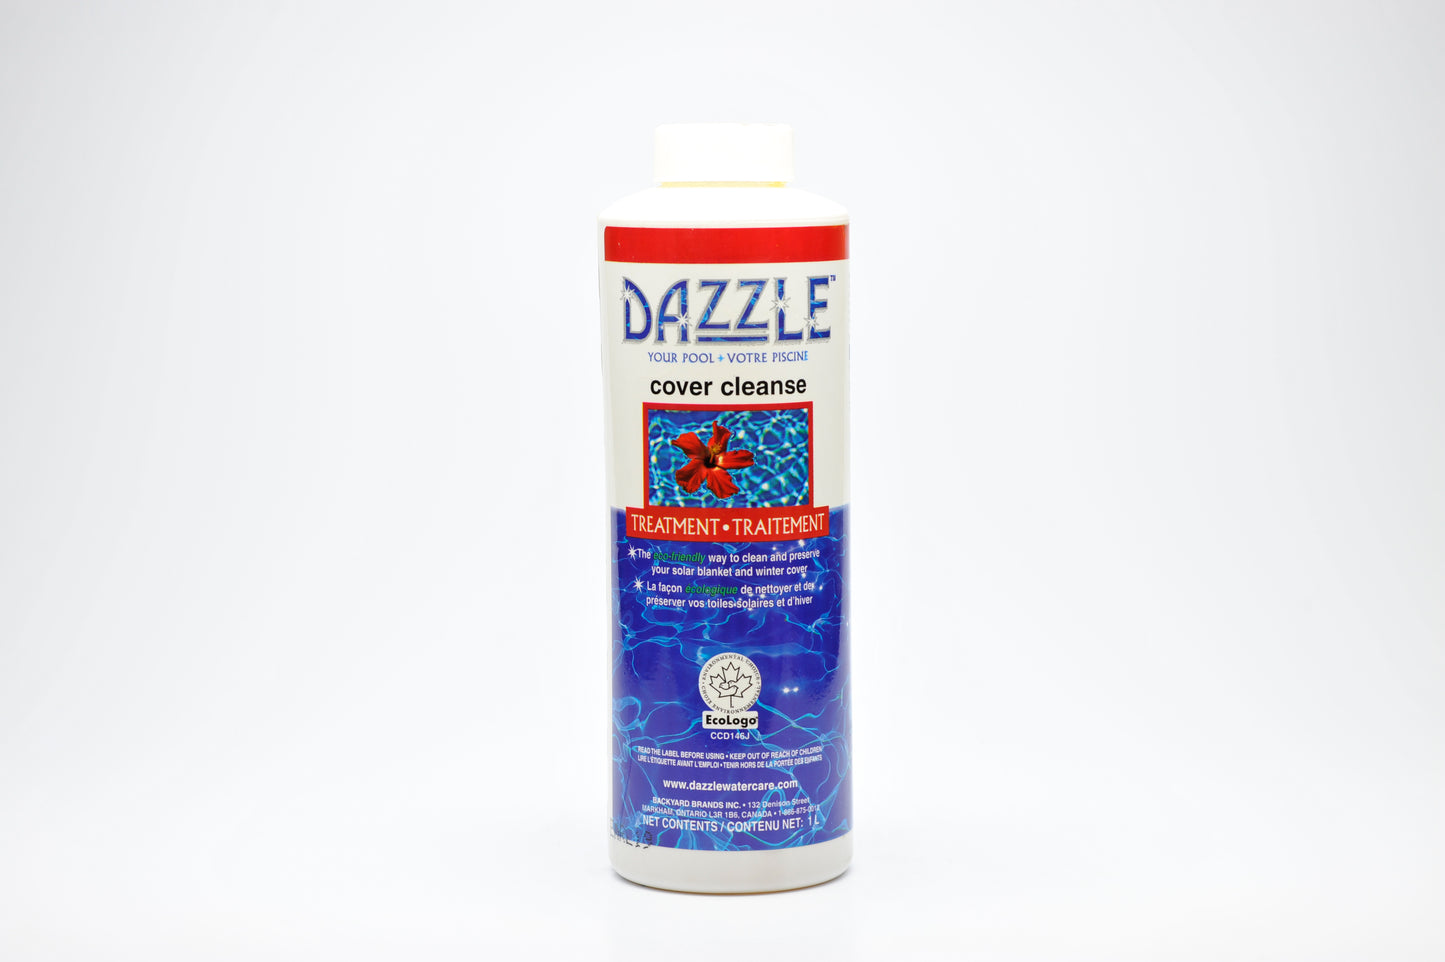 Dazzle Cover Cleanse